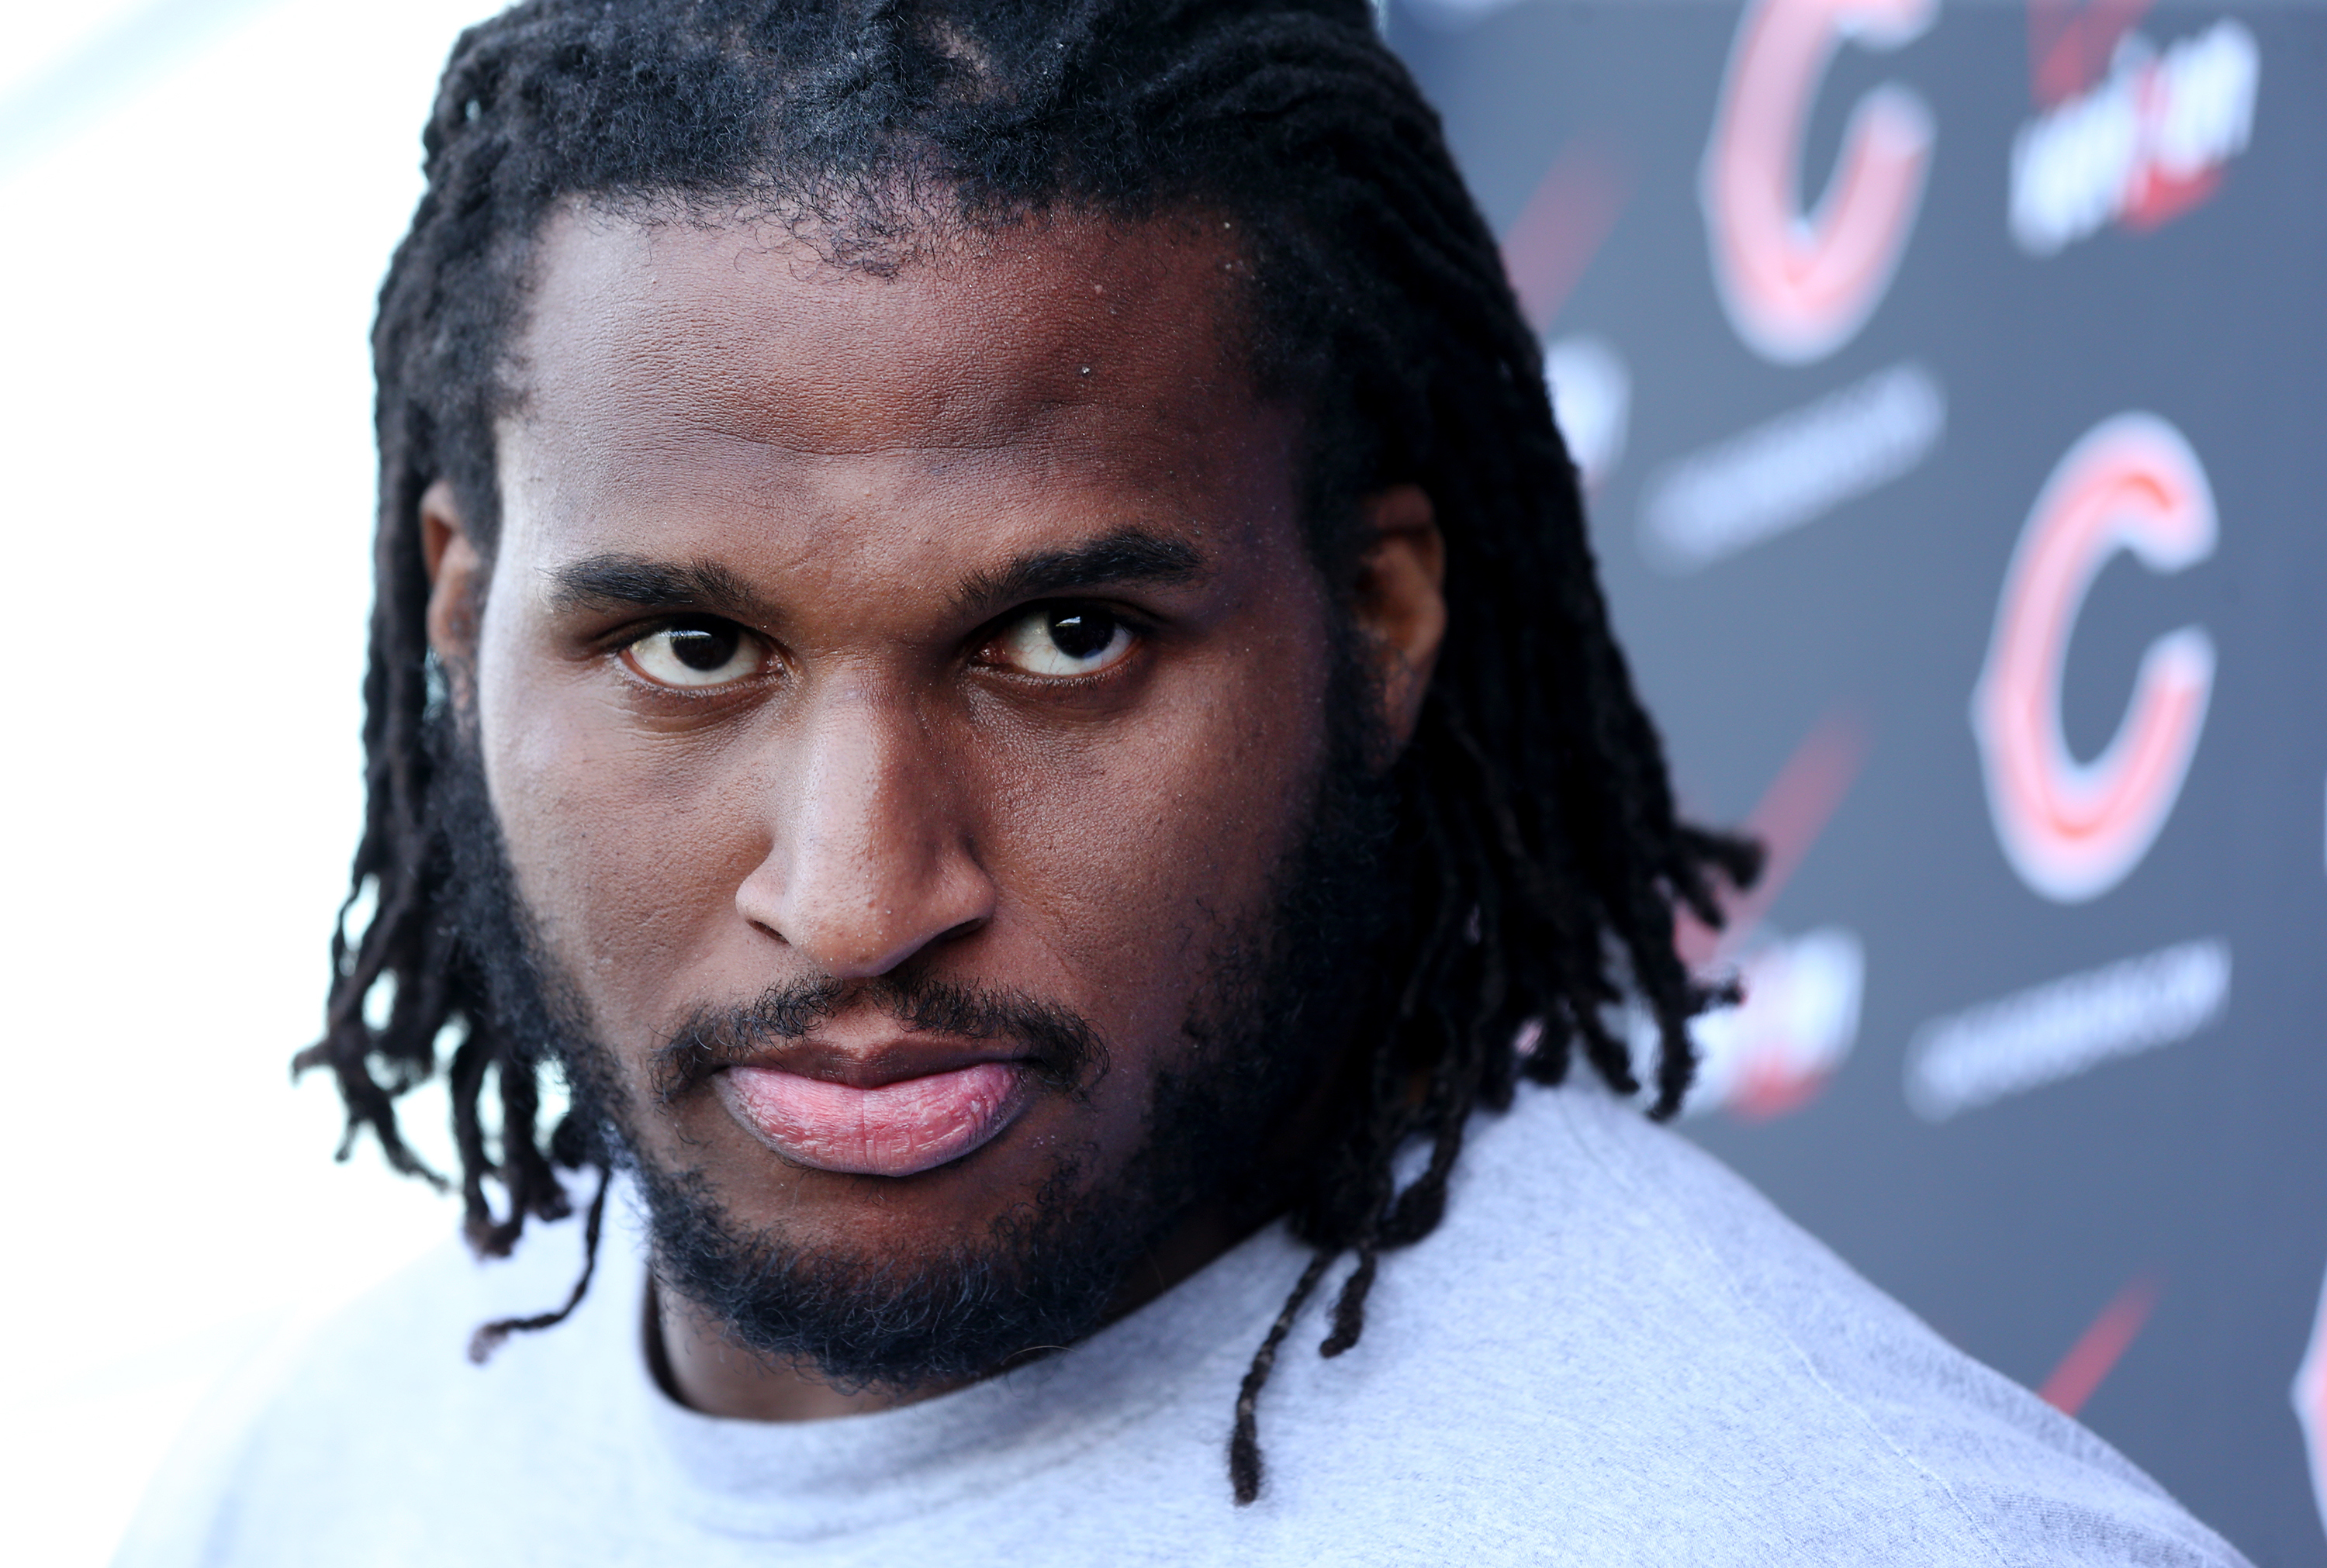 Chicago Bears defensive tackle Ray McDonald speaks with the media after minicamp on Tuesday, April 28, 2015, at Halas Hall in Lake Forest, Ill. The team released McDonald after he was arrested Monday on a domestic violence charge.